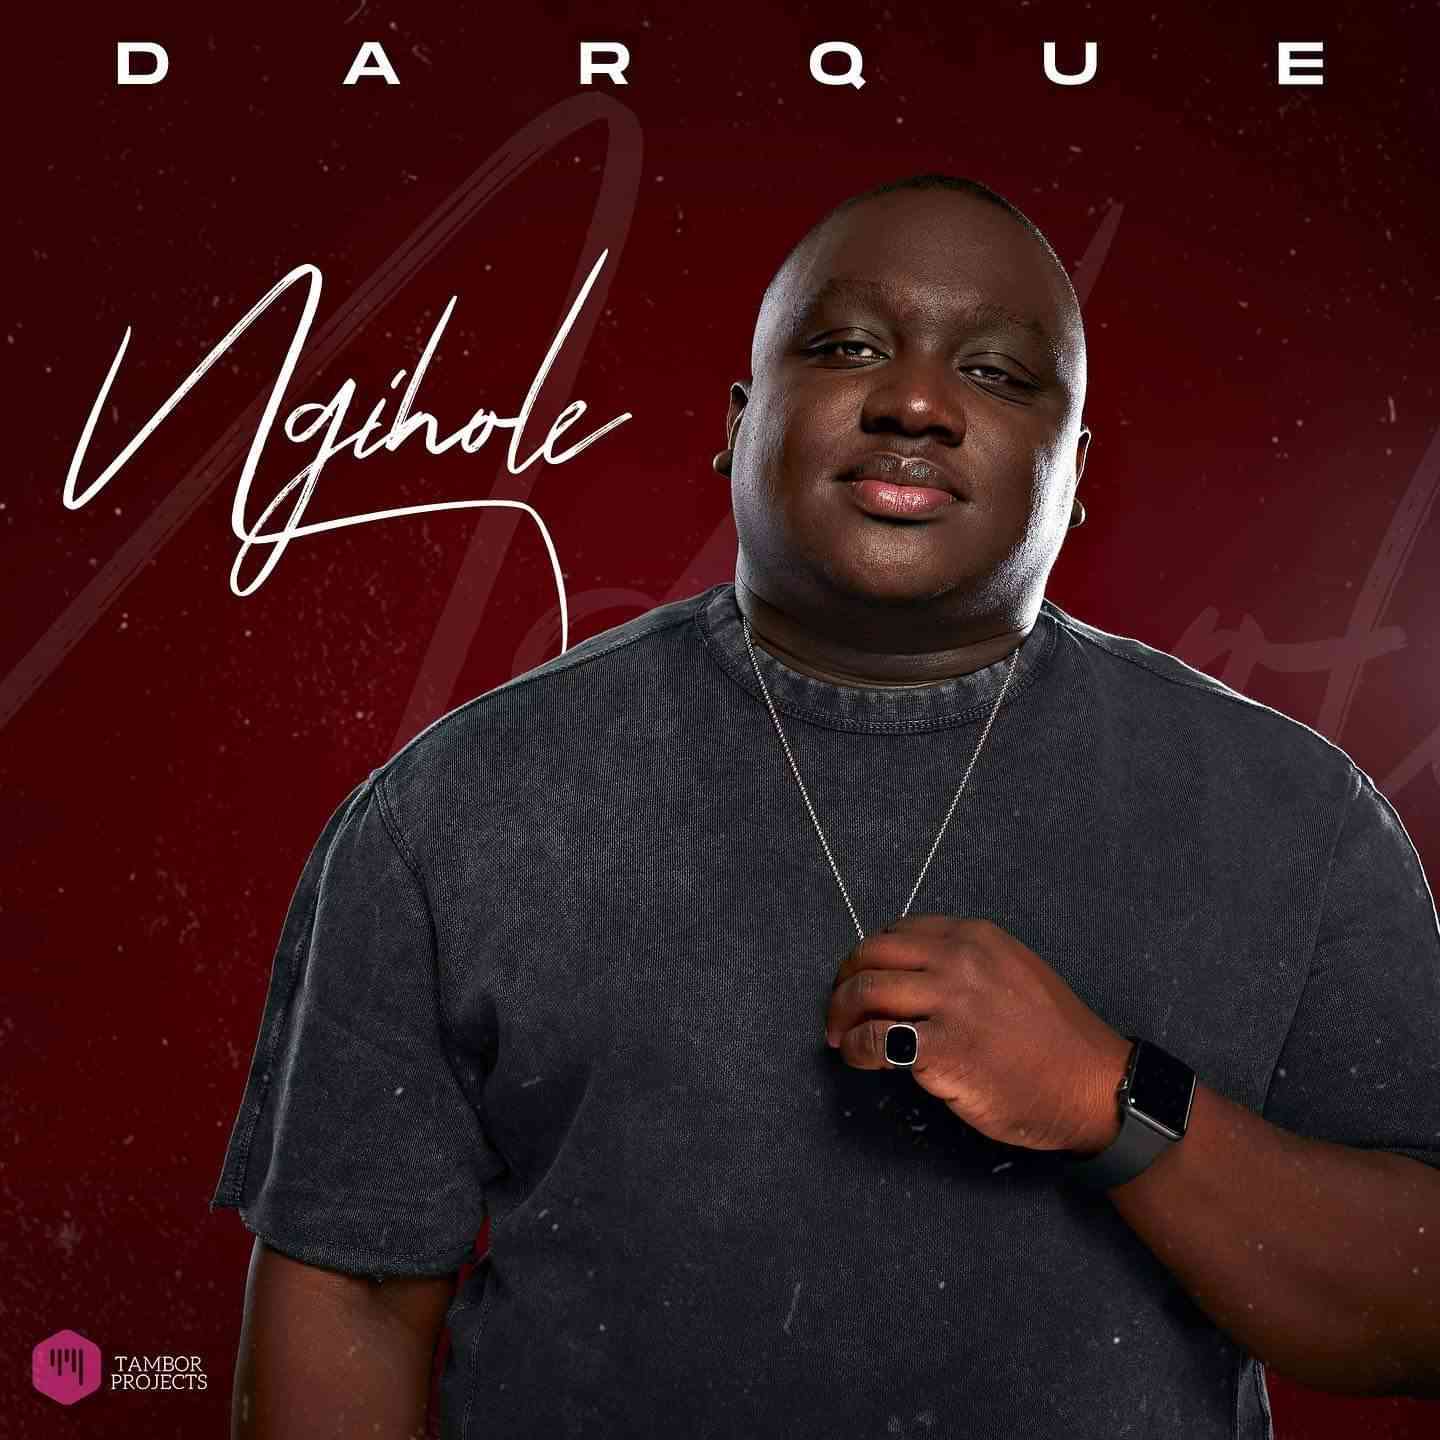 Darque Drops Ngihole EP